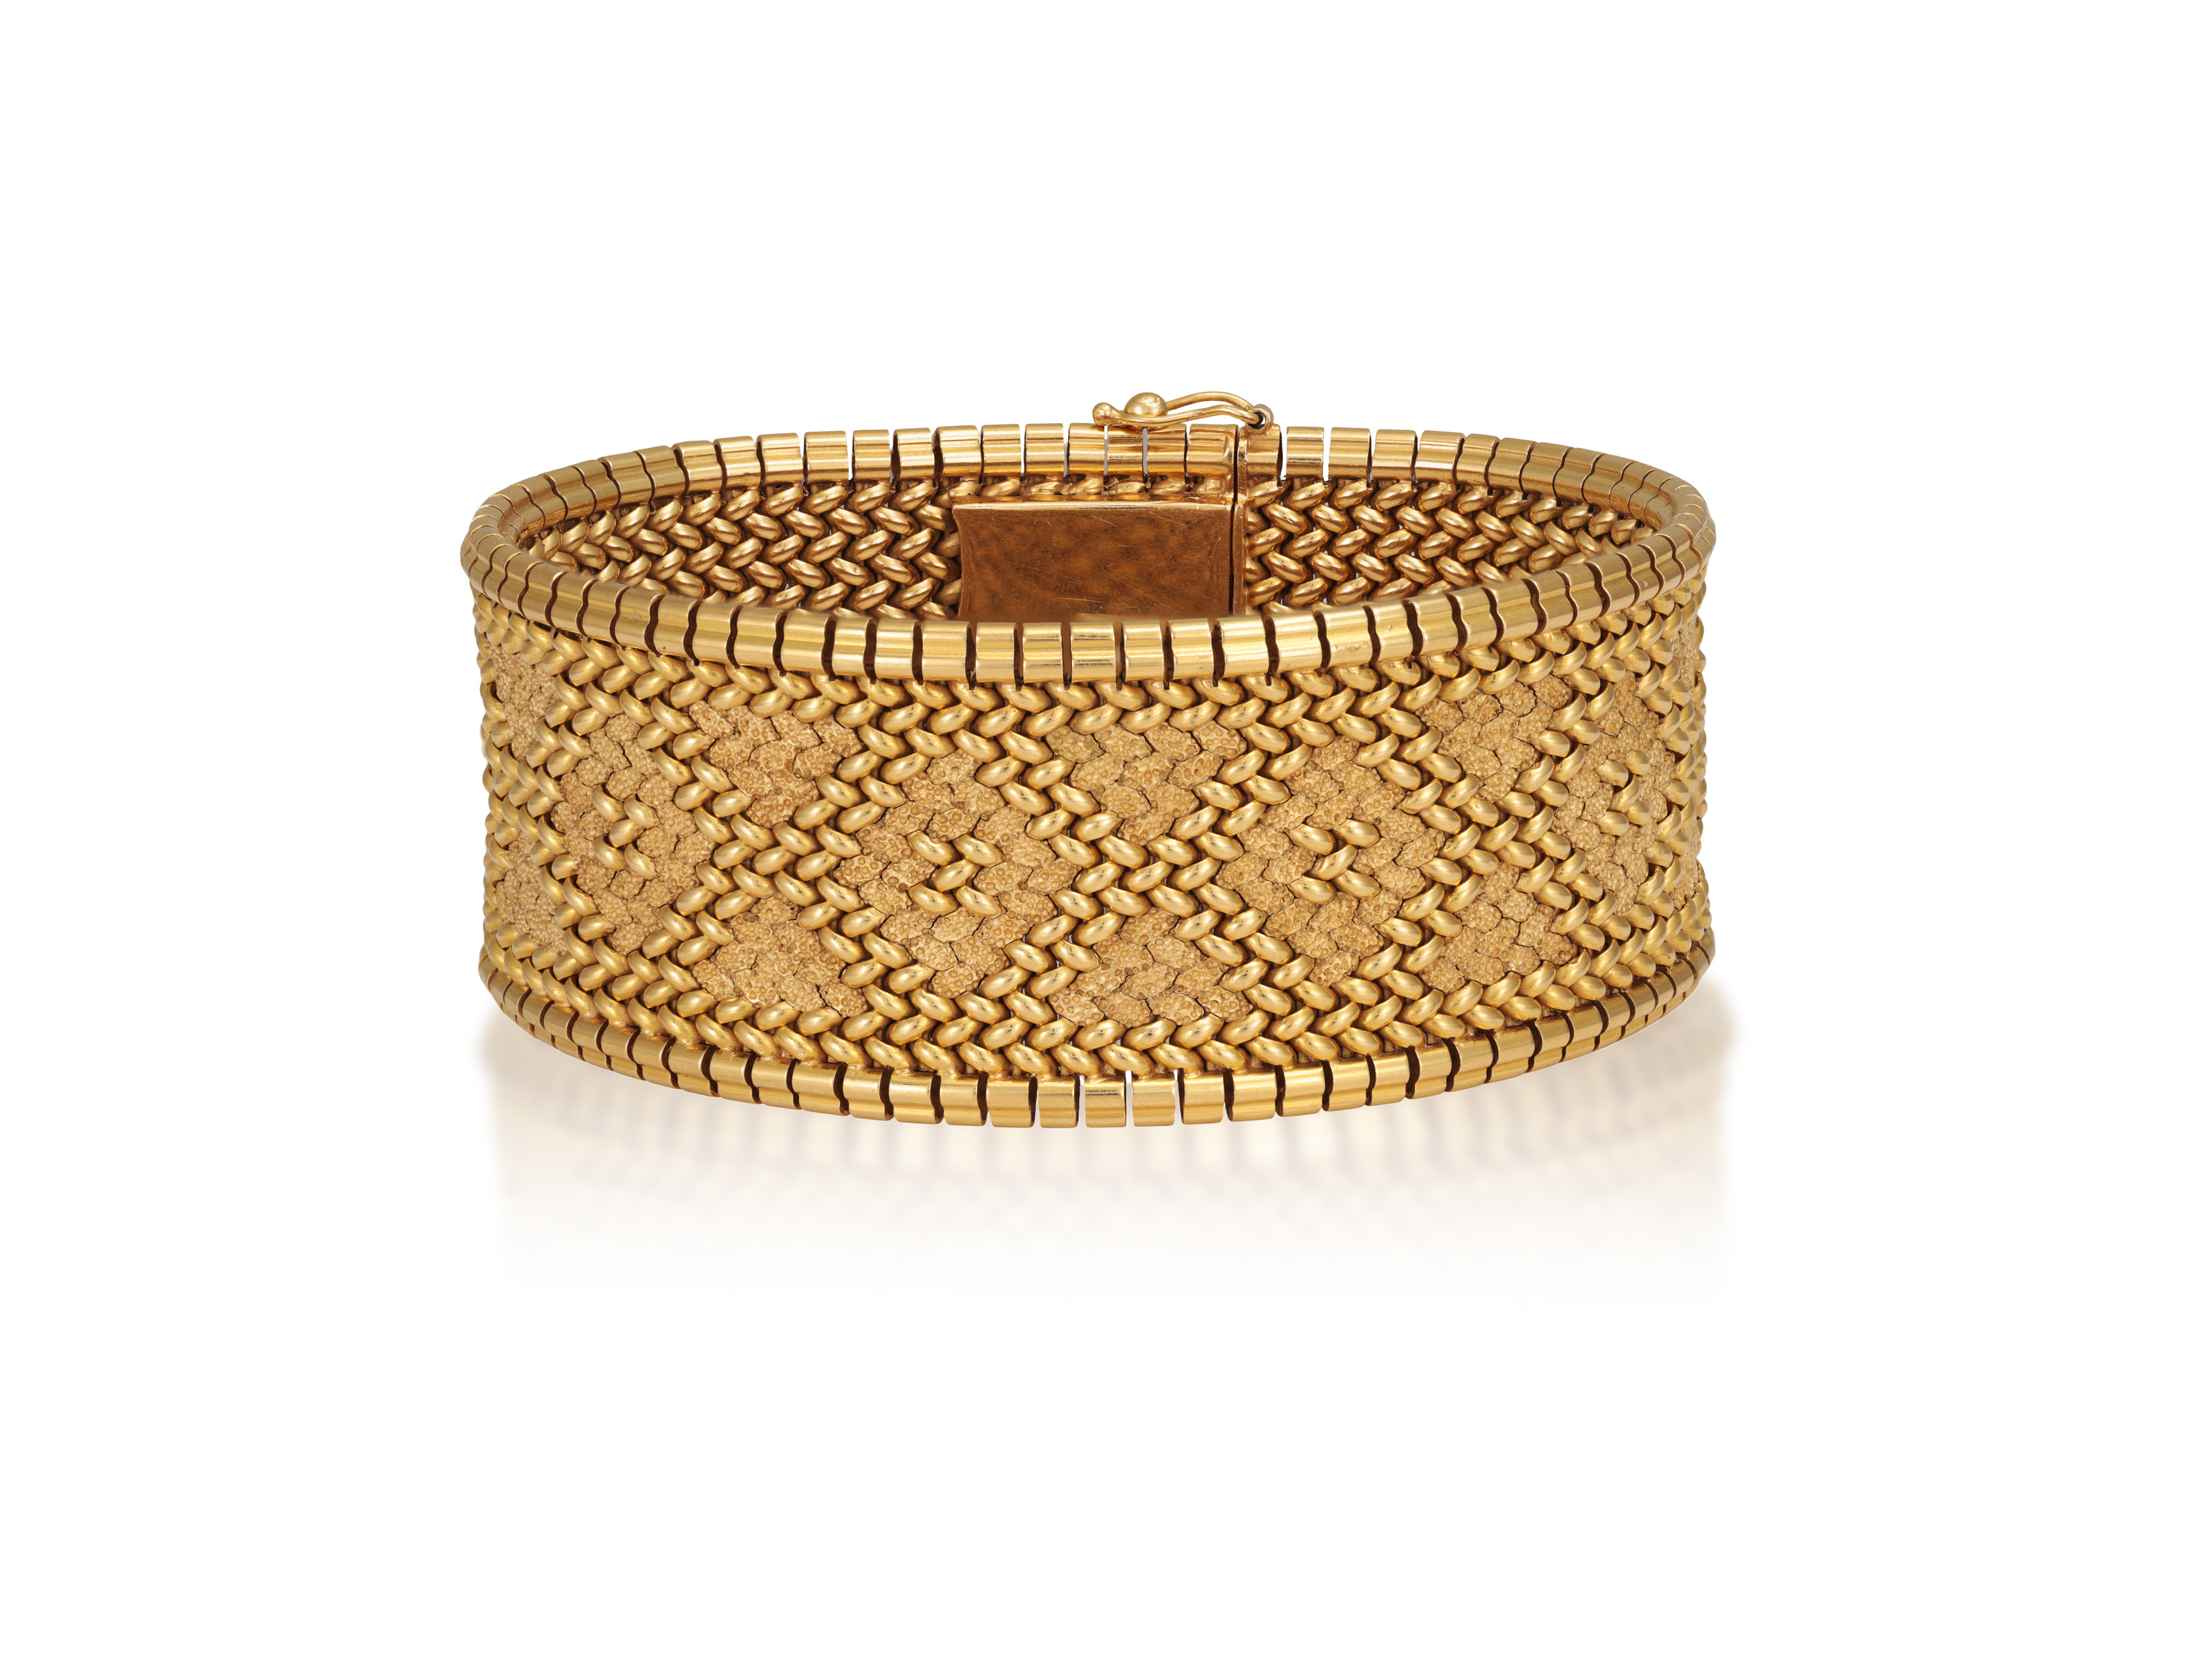 A GOLD BRACELET, FRENCH, CIRCA 1965 The textured and polished strap designed to resemble embroidery, - Image 2 of 4